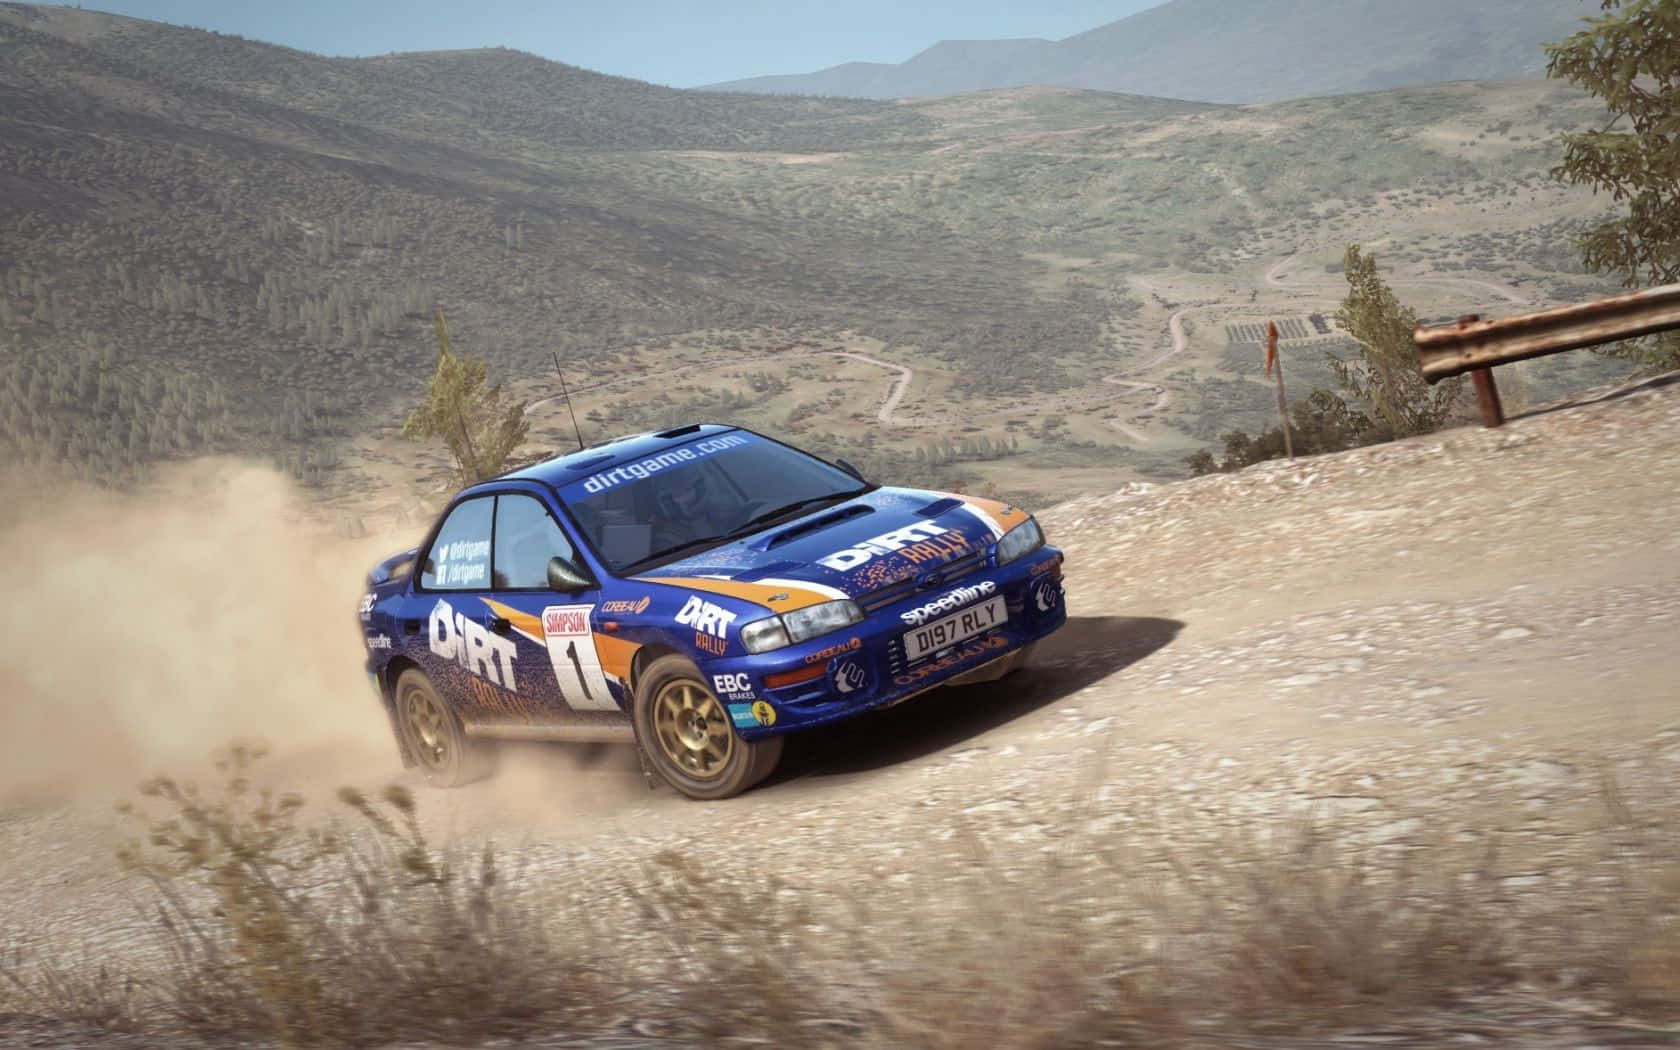 Get behind the wheel and experience the thrills of Dirt Rally!